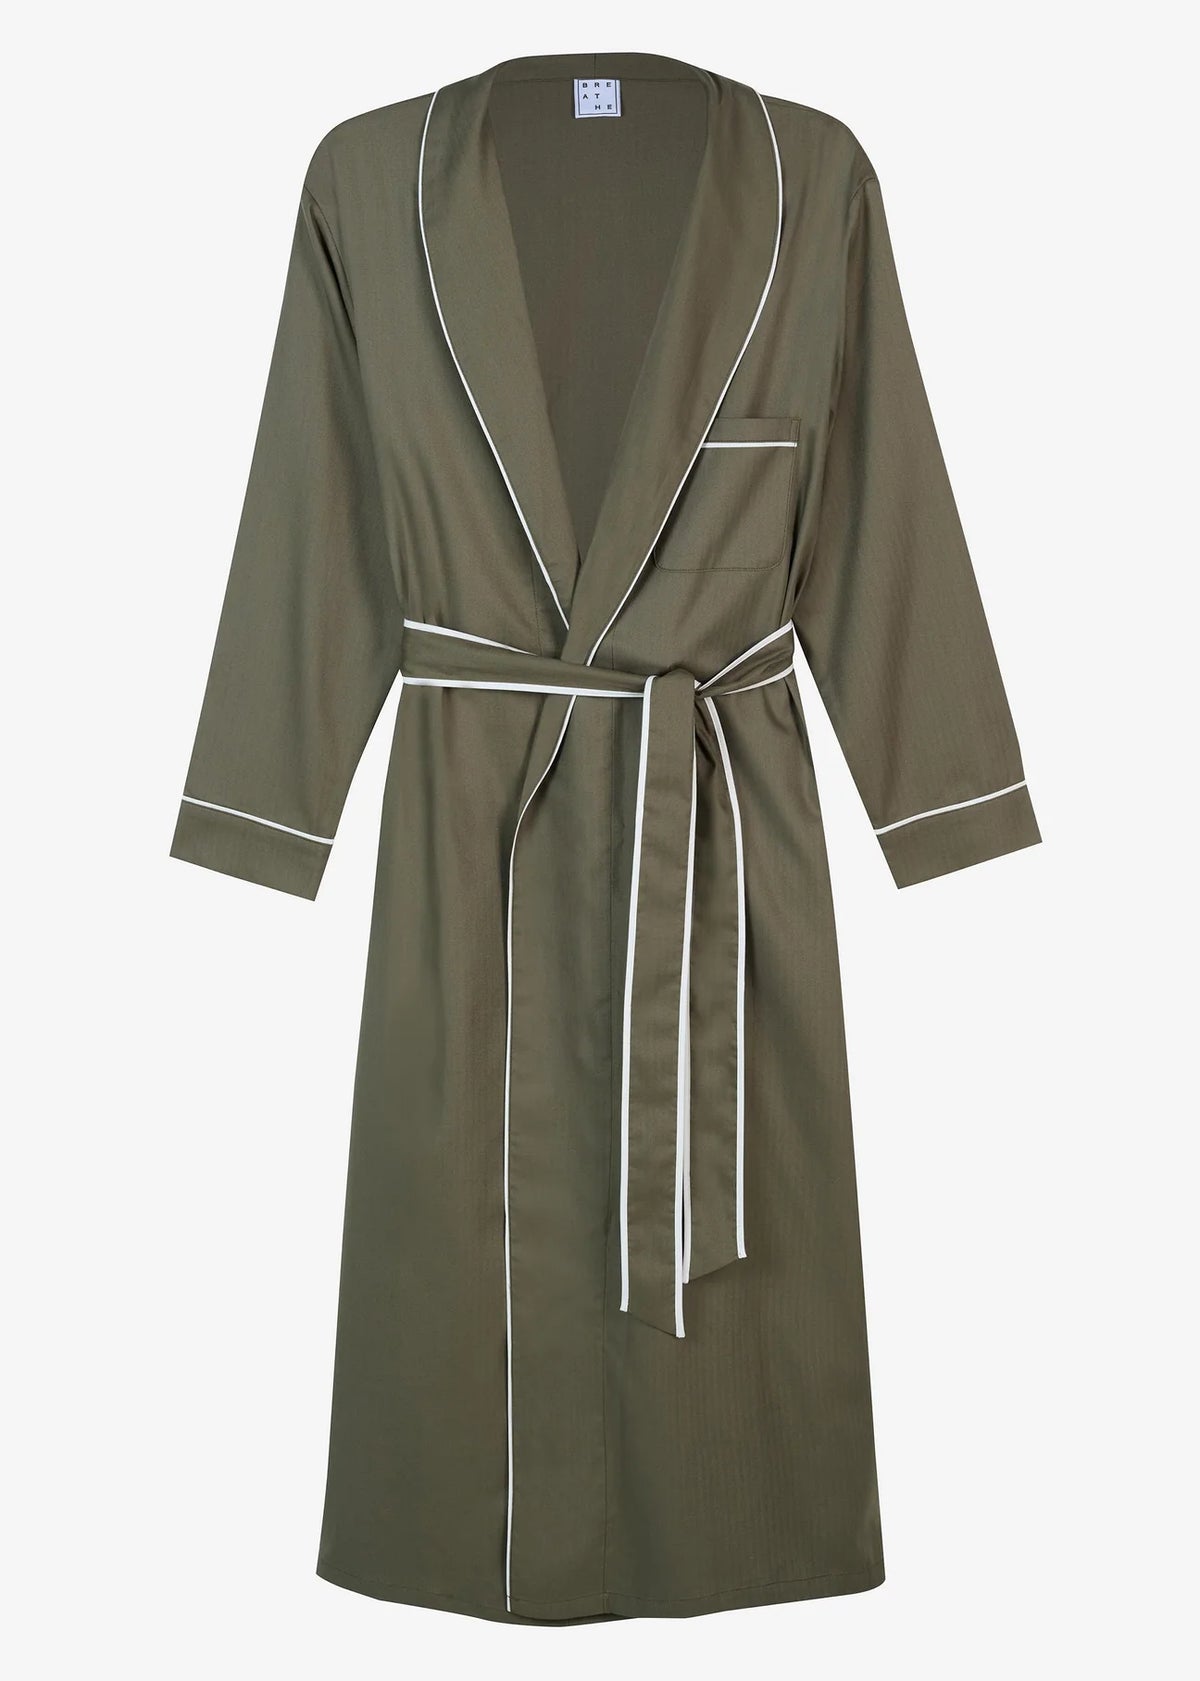 Khaki herringbone cotton robe with front pocket and self tie belt and contrast white trim